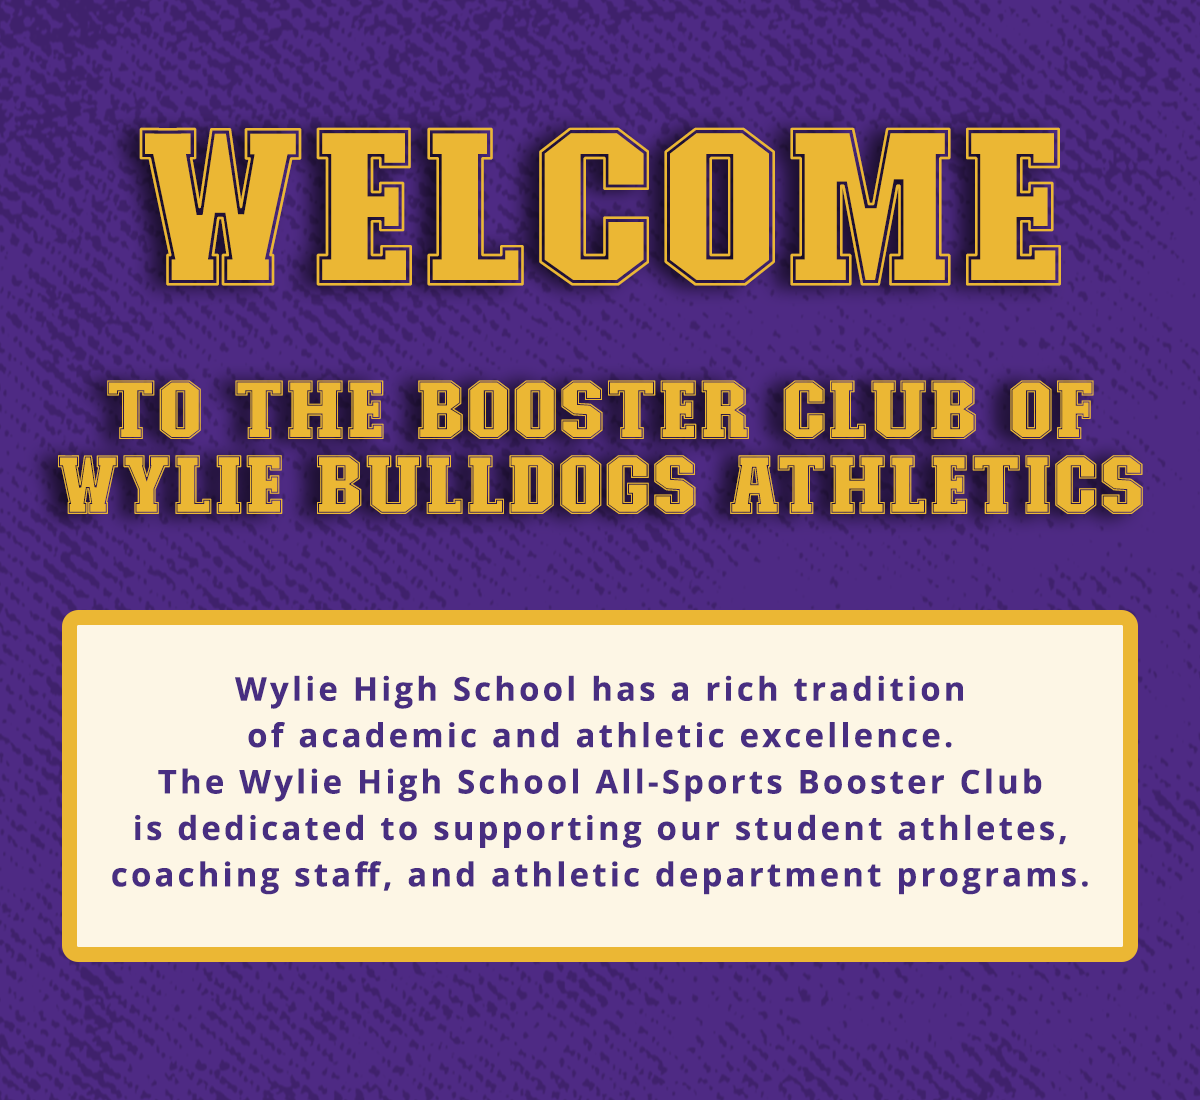 Welcome to the Booster Club of Wylie Bulldog Athletics. Wylie High School has a rich tradition of academic and athletic excellence. 